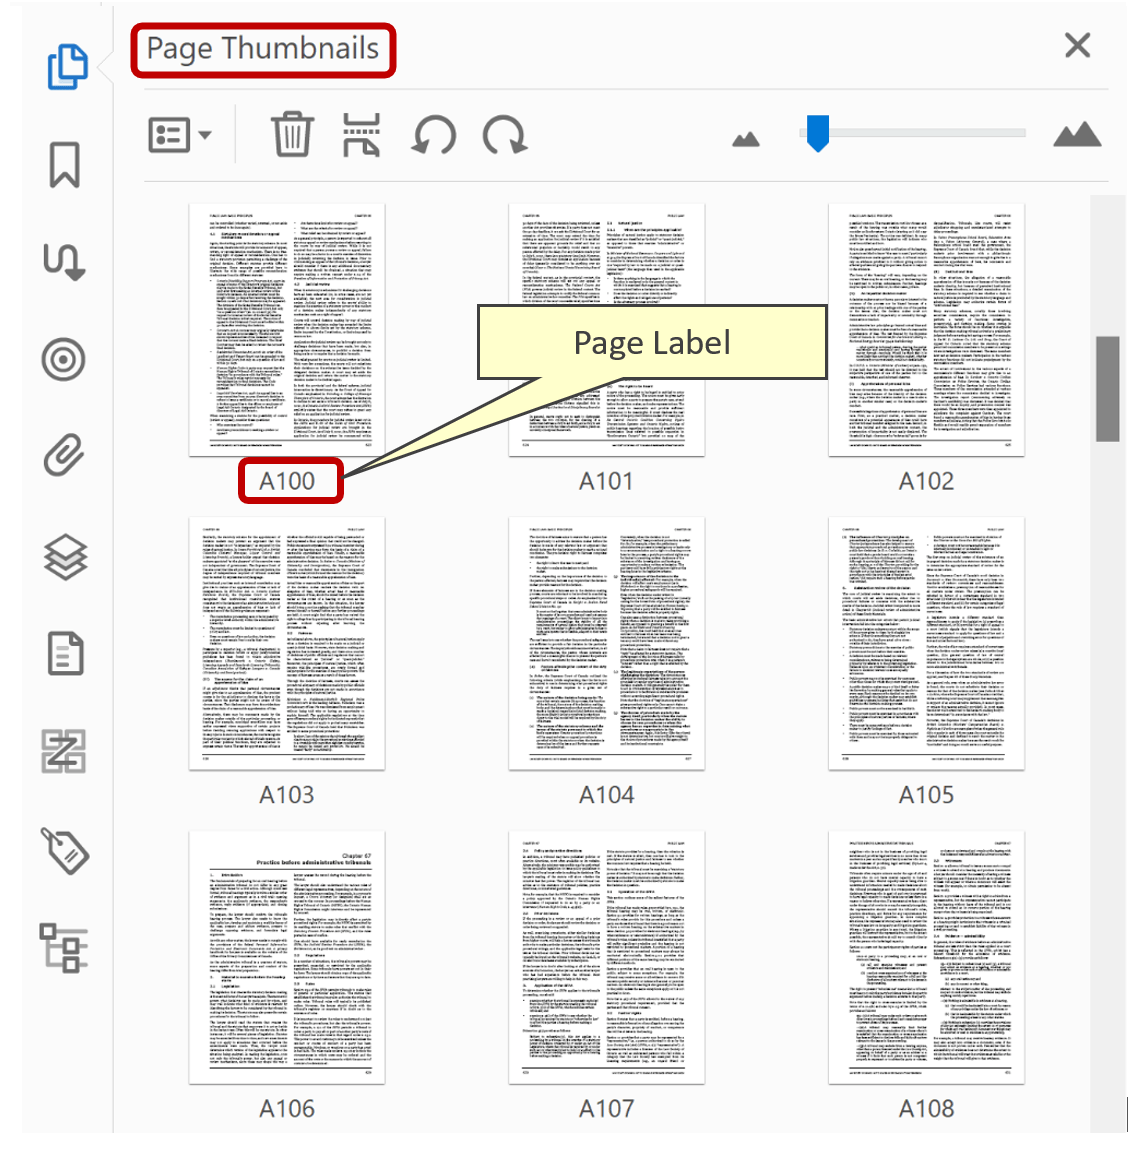 Page labels in the destination document